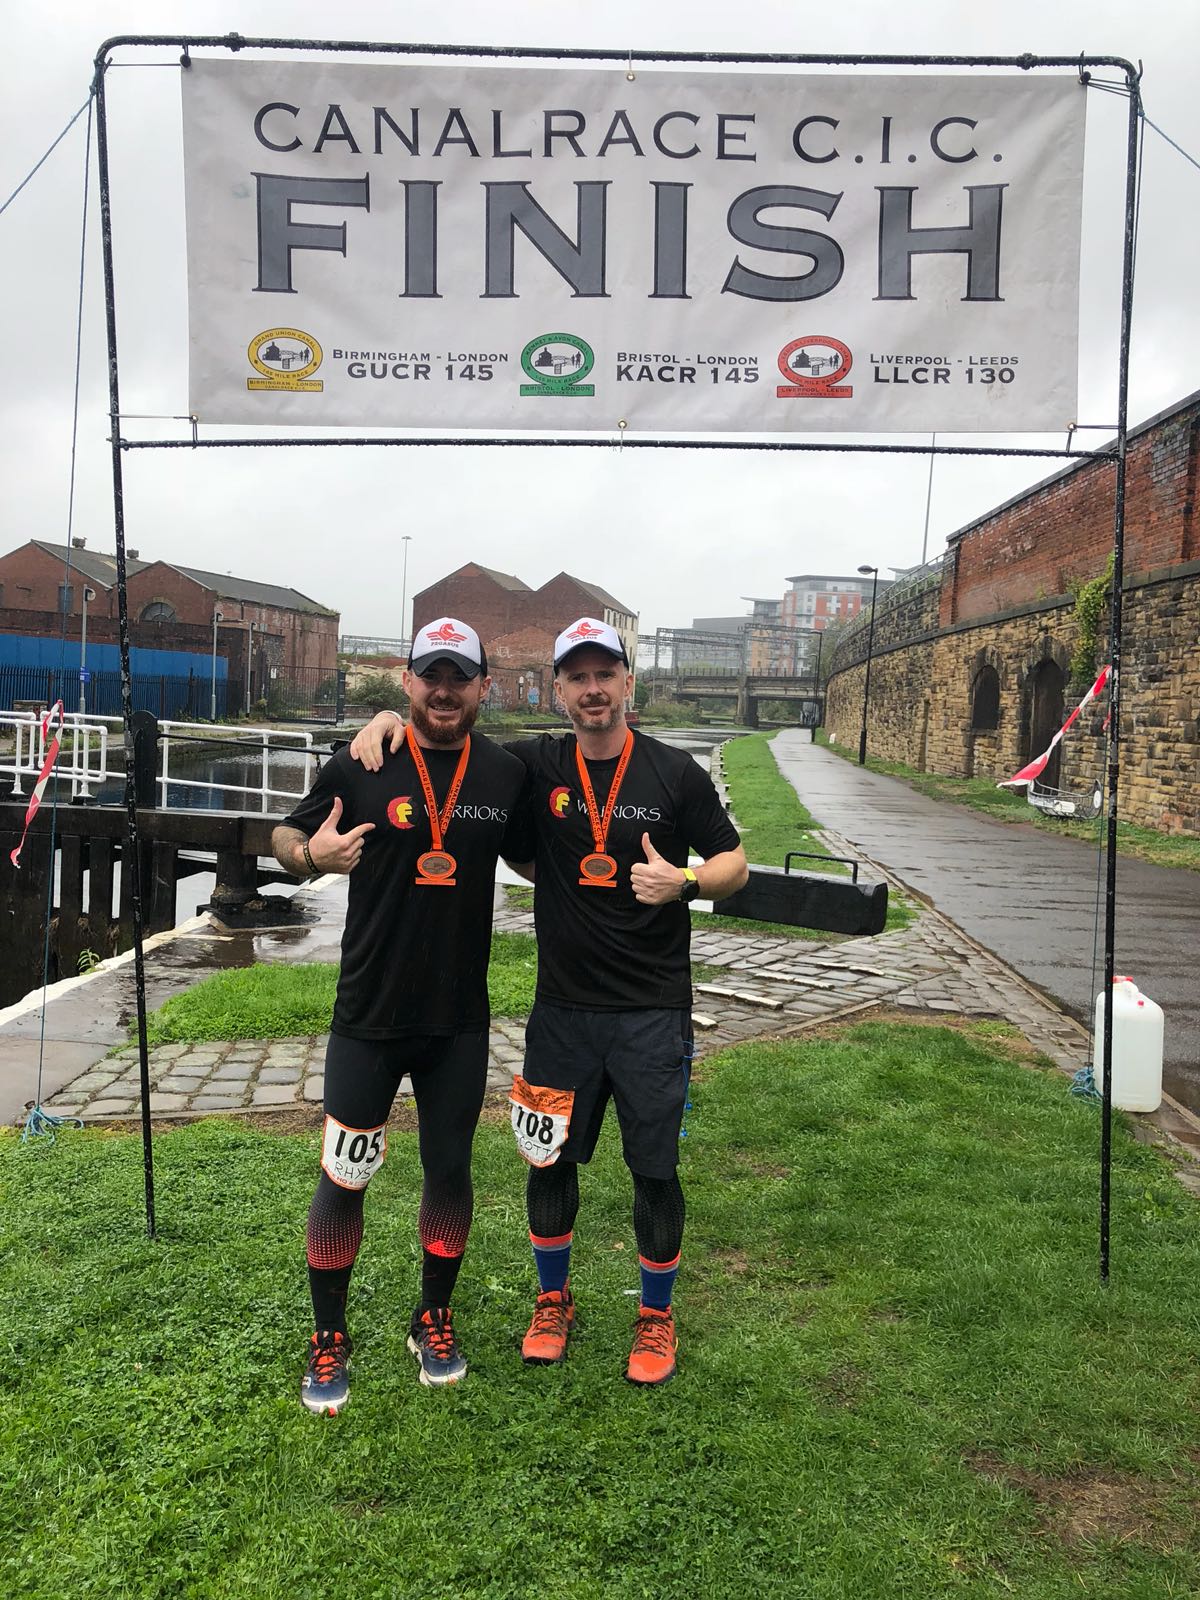 2018: Mile 130 of Liverpool to Leeds finishing joint 11th whilst raising awareness for CF Warriors.